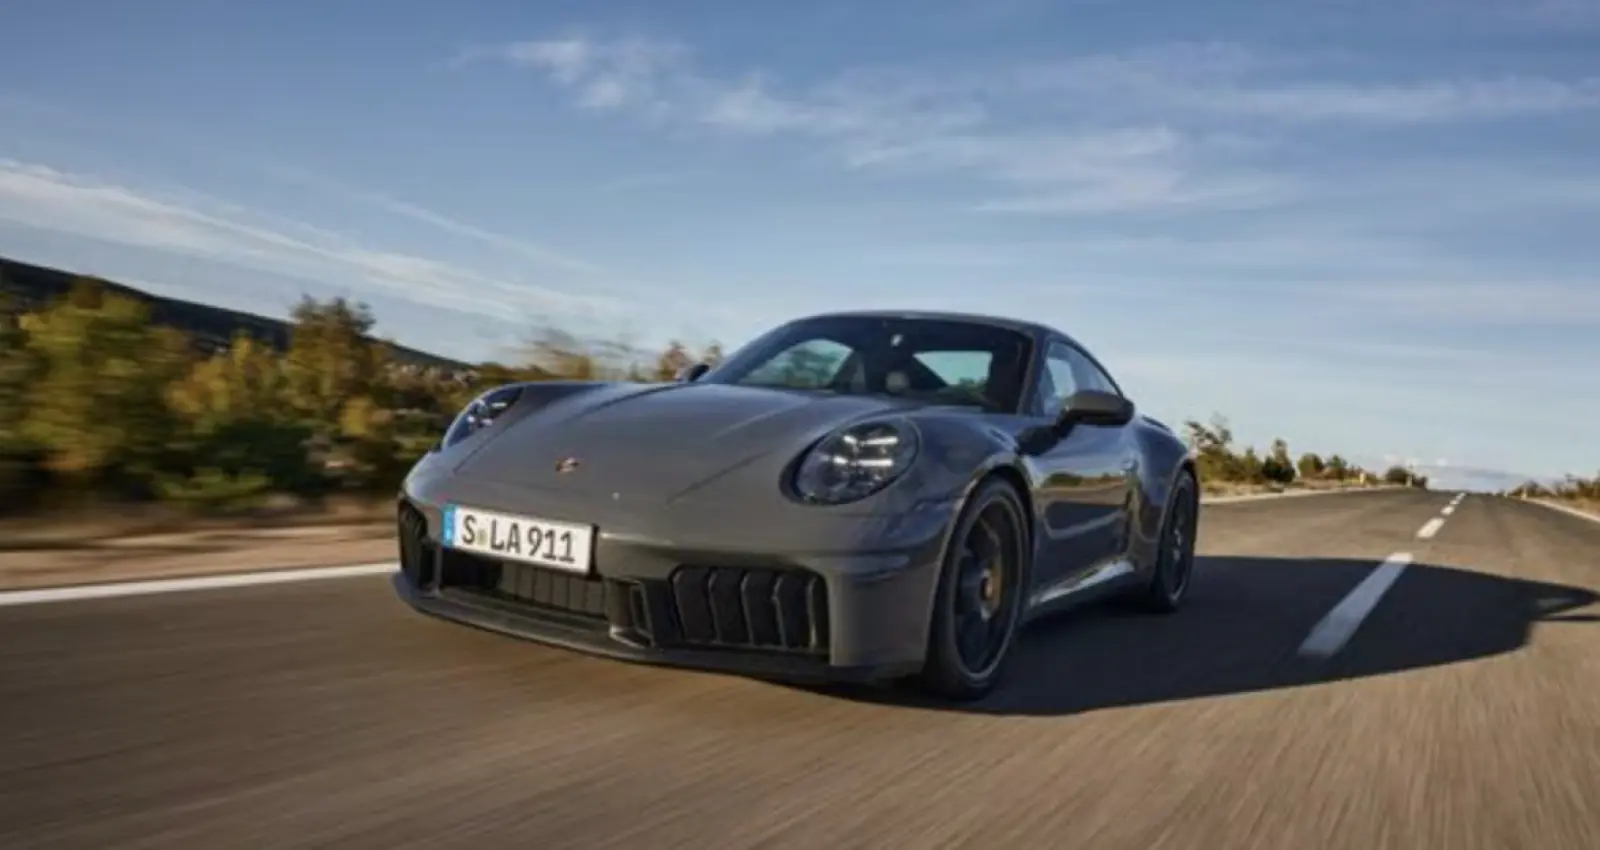 Porsche introduced the Hybrid 911, which can accelerate to 100 KMPH in just three seconds, Know features